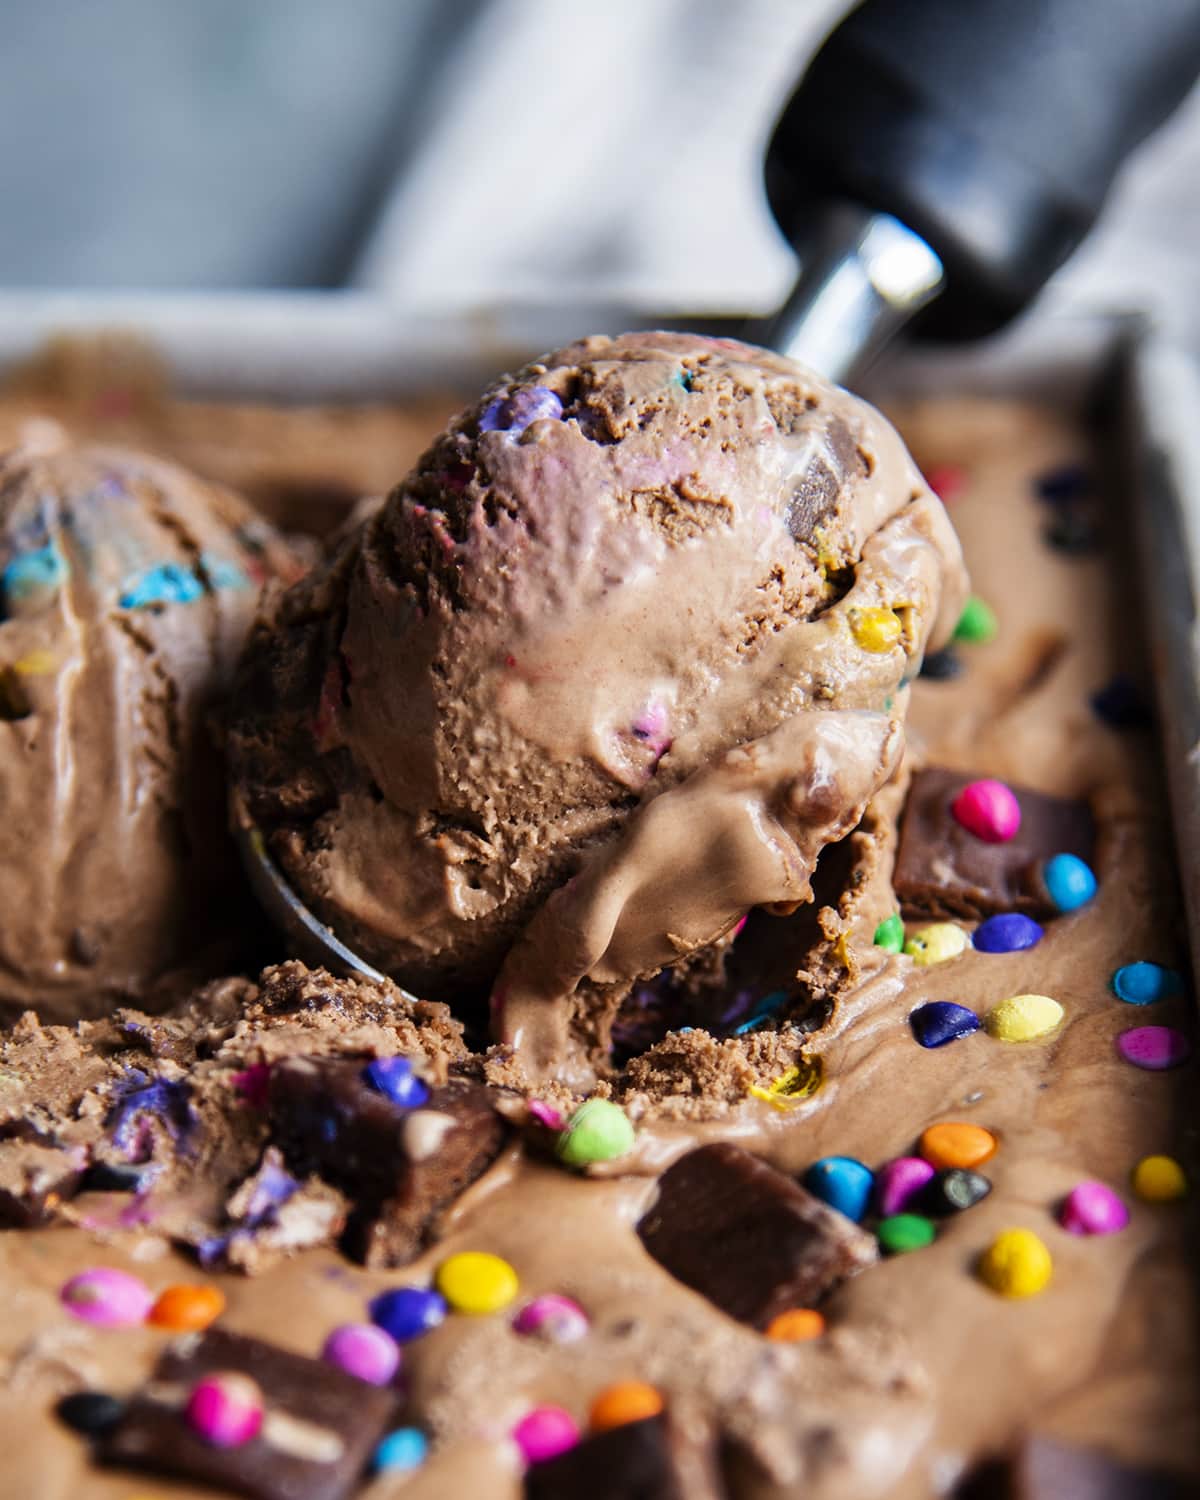 A close up of a scoop of cosmic brownie ice cream.